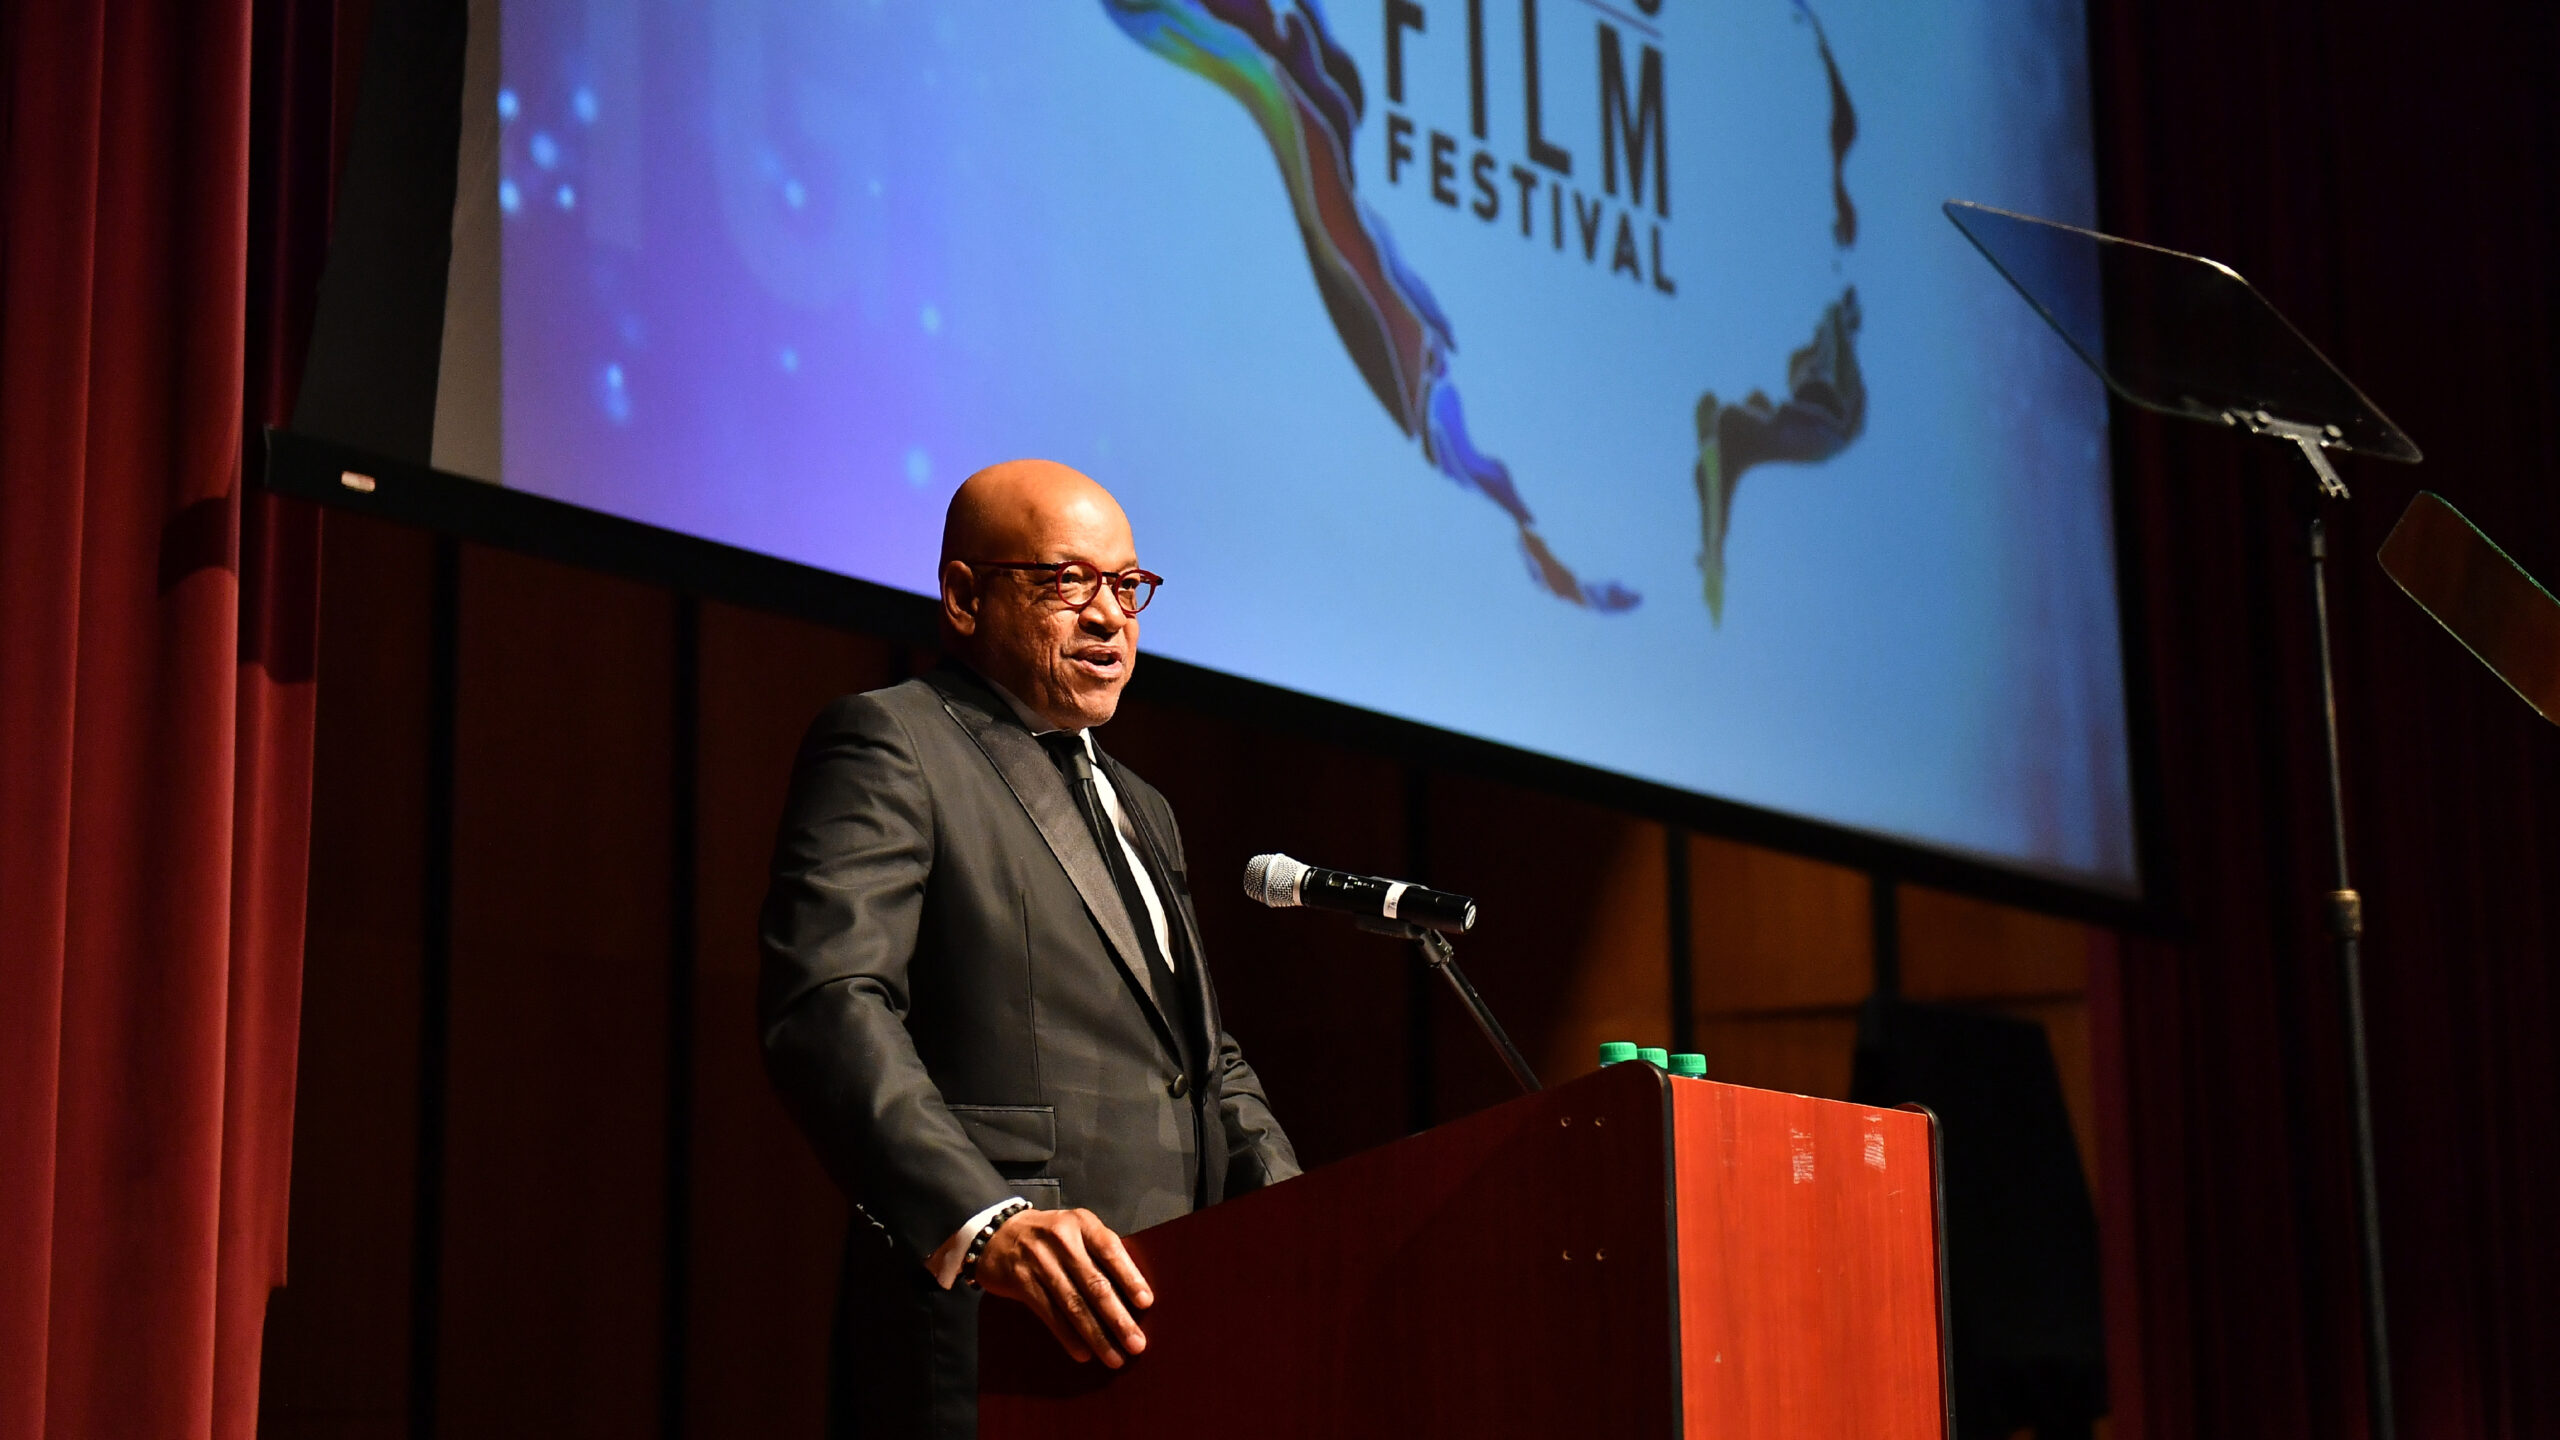 ATLANTA, GEORGIA - OCTOBER 12: Morehouse President Dr. David A. Thomas speaks onstage during 1st Annual Morehouse College Human Rights Film Festival Awards Ceremony at Ray Charles Performing Arts Center on October 12, 2019 in Atlanta, Georgia. (Photo by Paras Griffin/Getty Images)